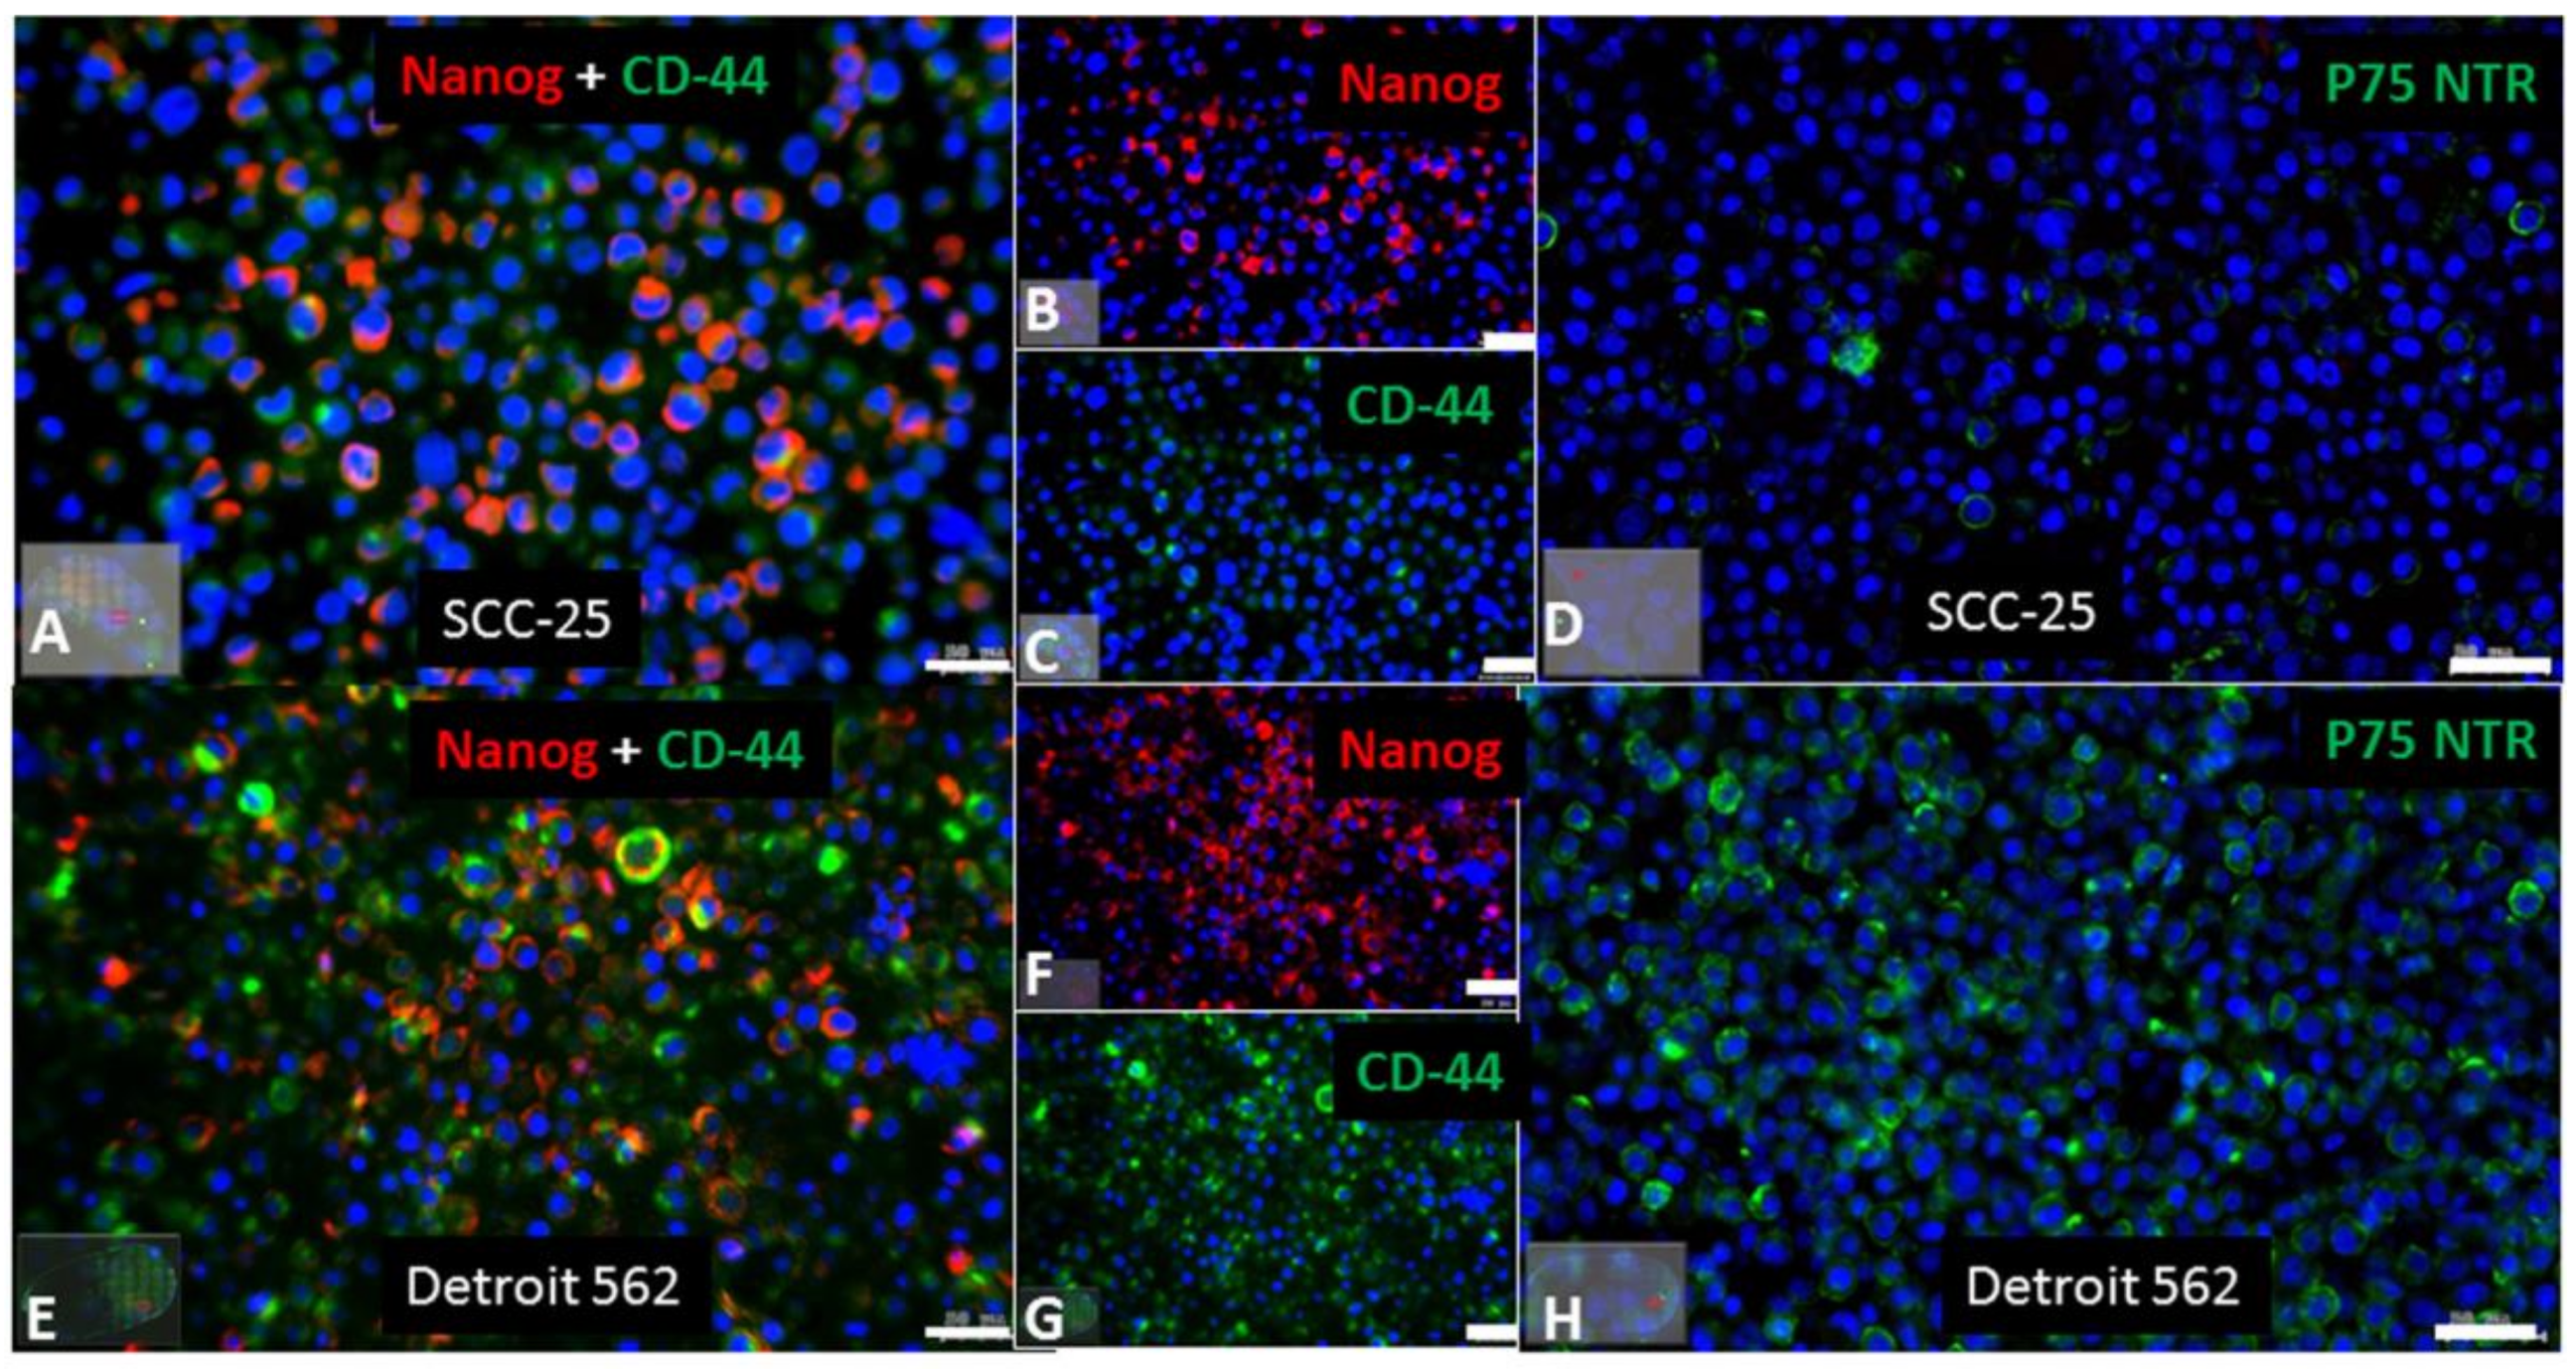 IJMS | Free Full-Text | Photodynamic Effect of Methylene Blue and Low Level  Laser Radiation in Head and Neck Squamous Cell Carcinoma Cell Lines | HTML